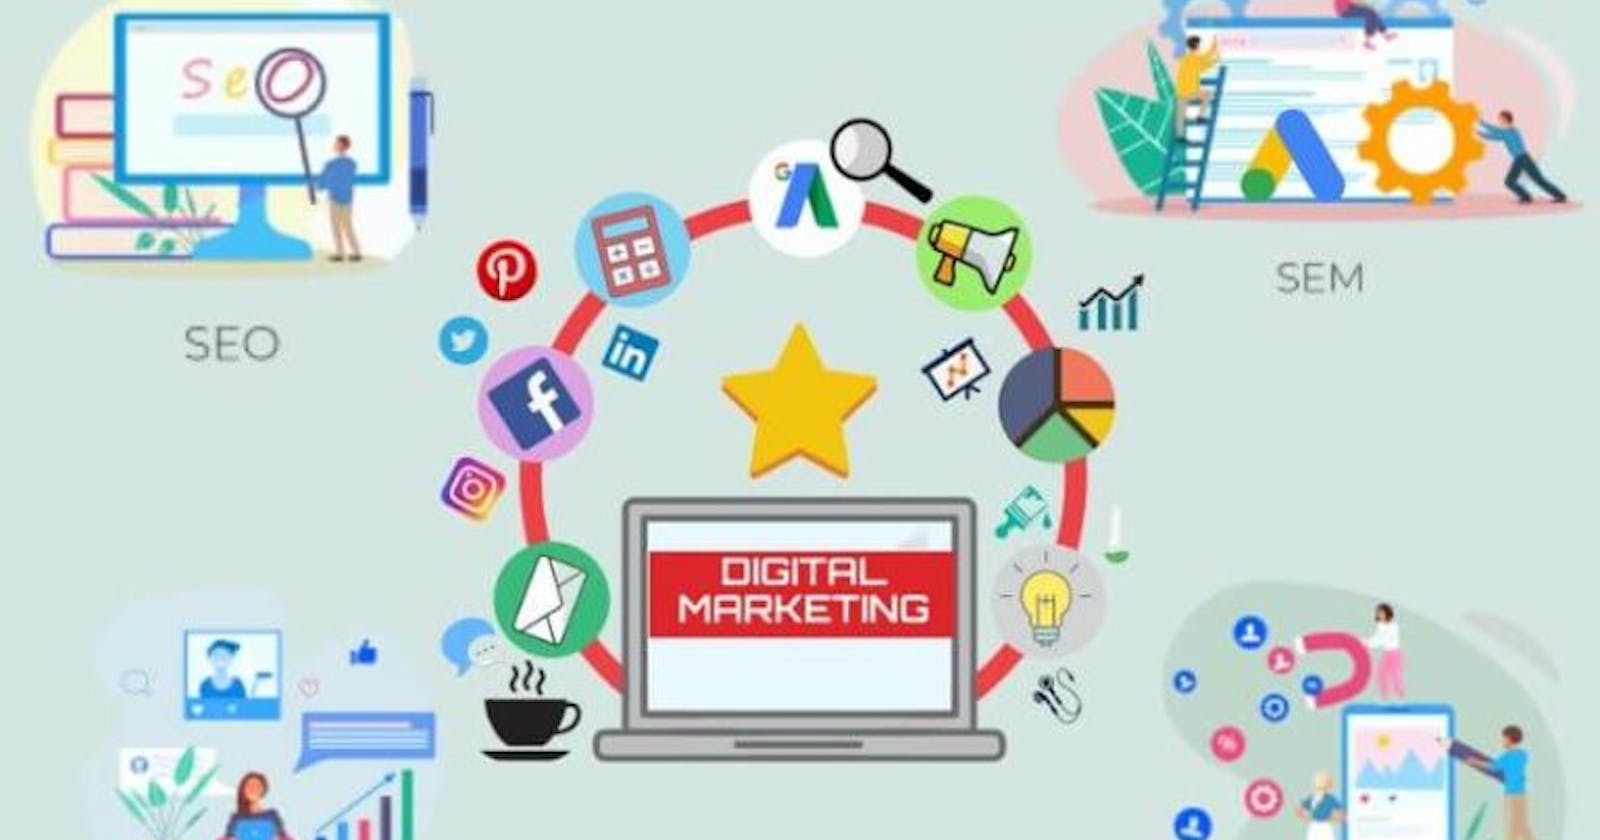 What is SEO, SEM, SMO and SMM in digital marketing